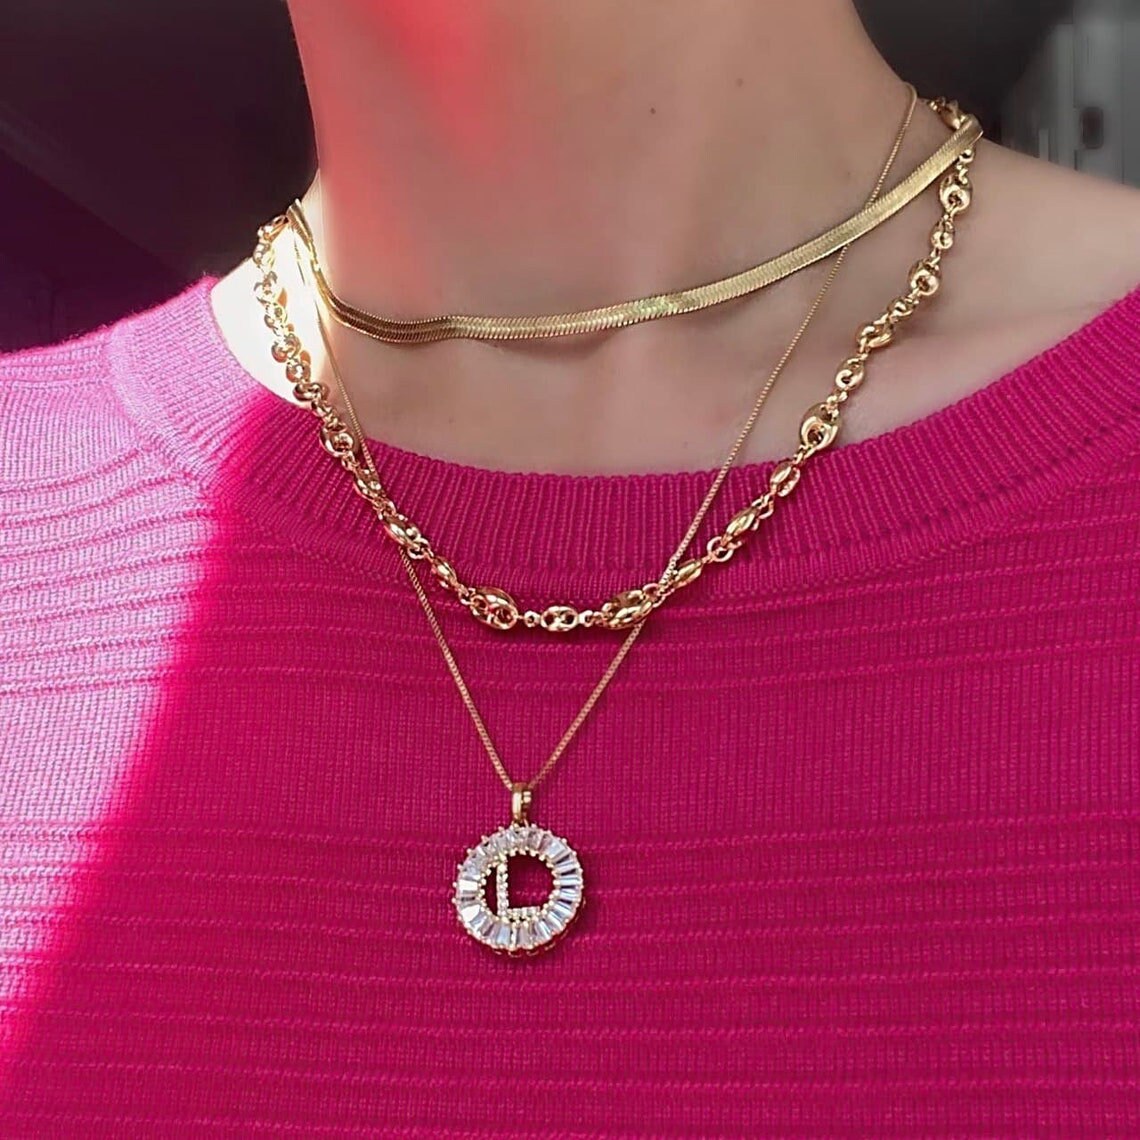 THICK SNAKE NECKLACE- 14k Yellow Gold - The Littl A$174.99 A$204.99 14k  Yellow Gold Chokers Designer Faves